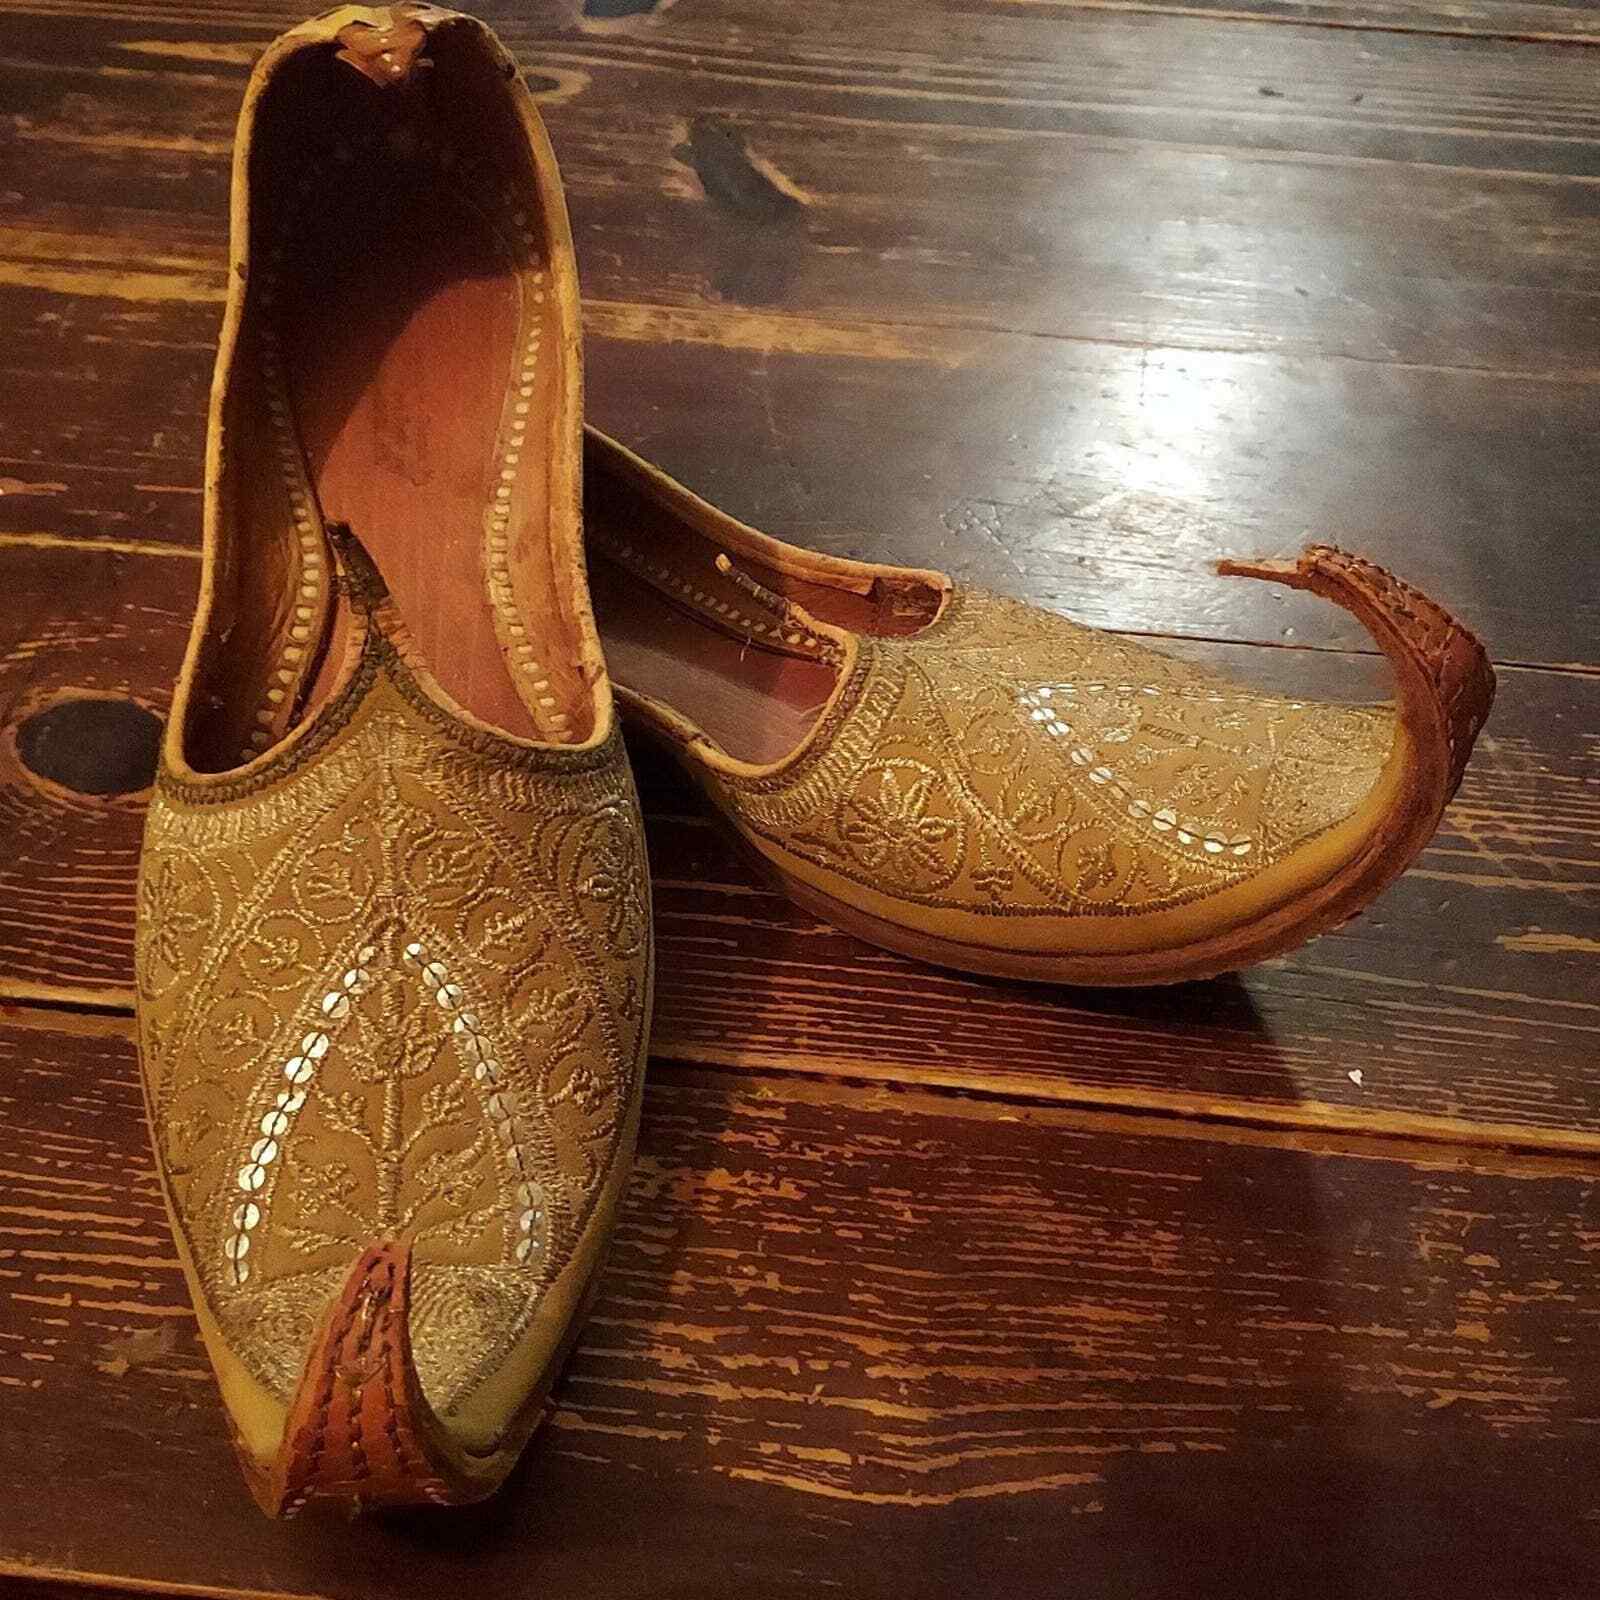 Antique Middle Eastern Aladdin Shoes